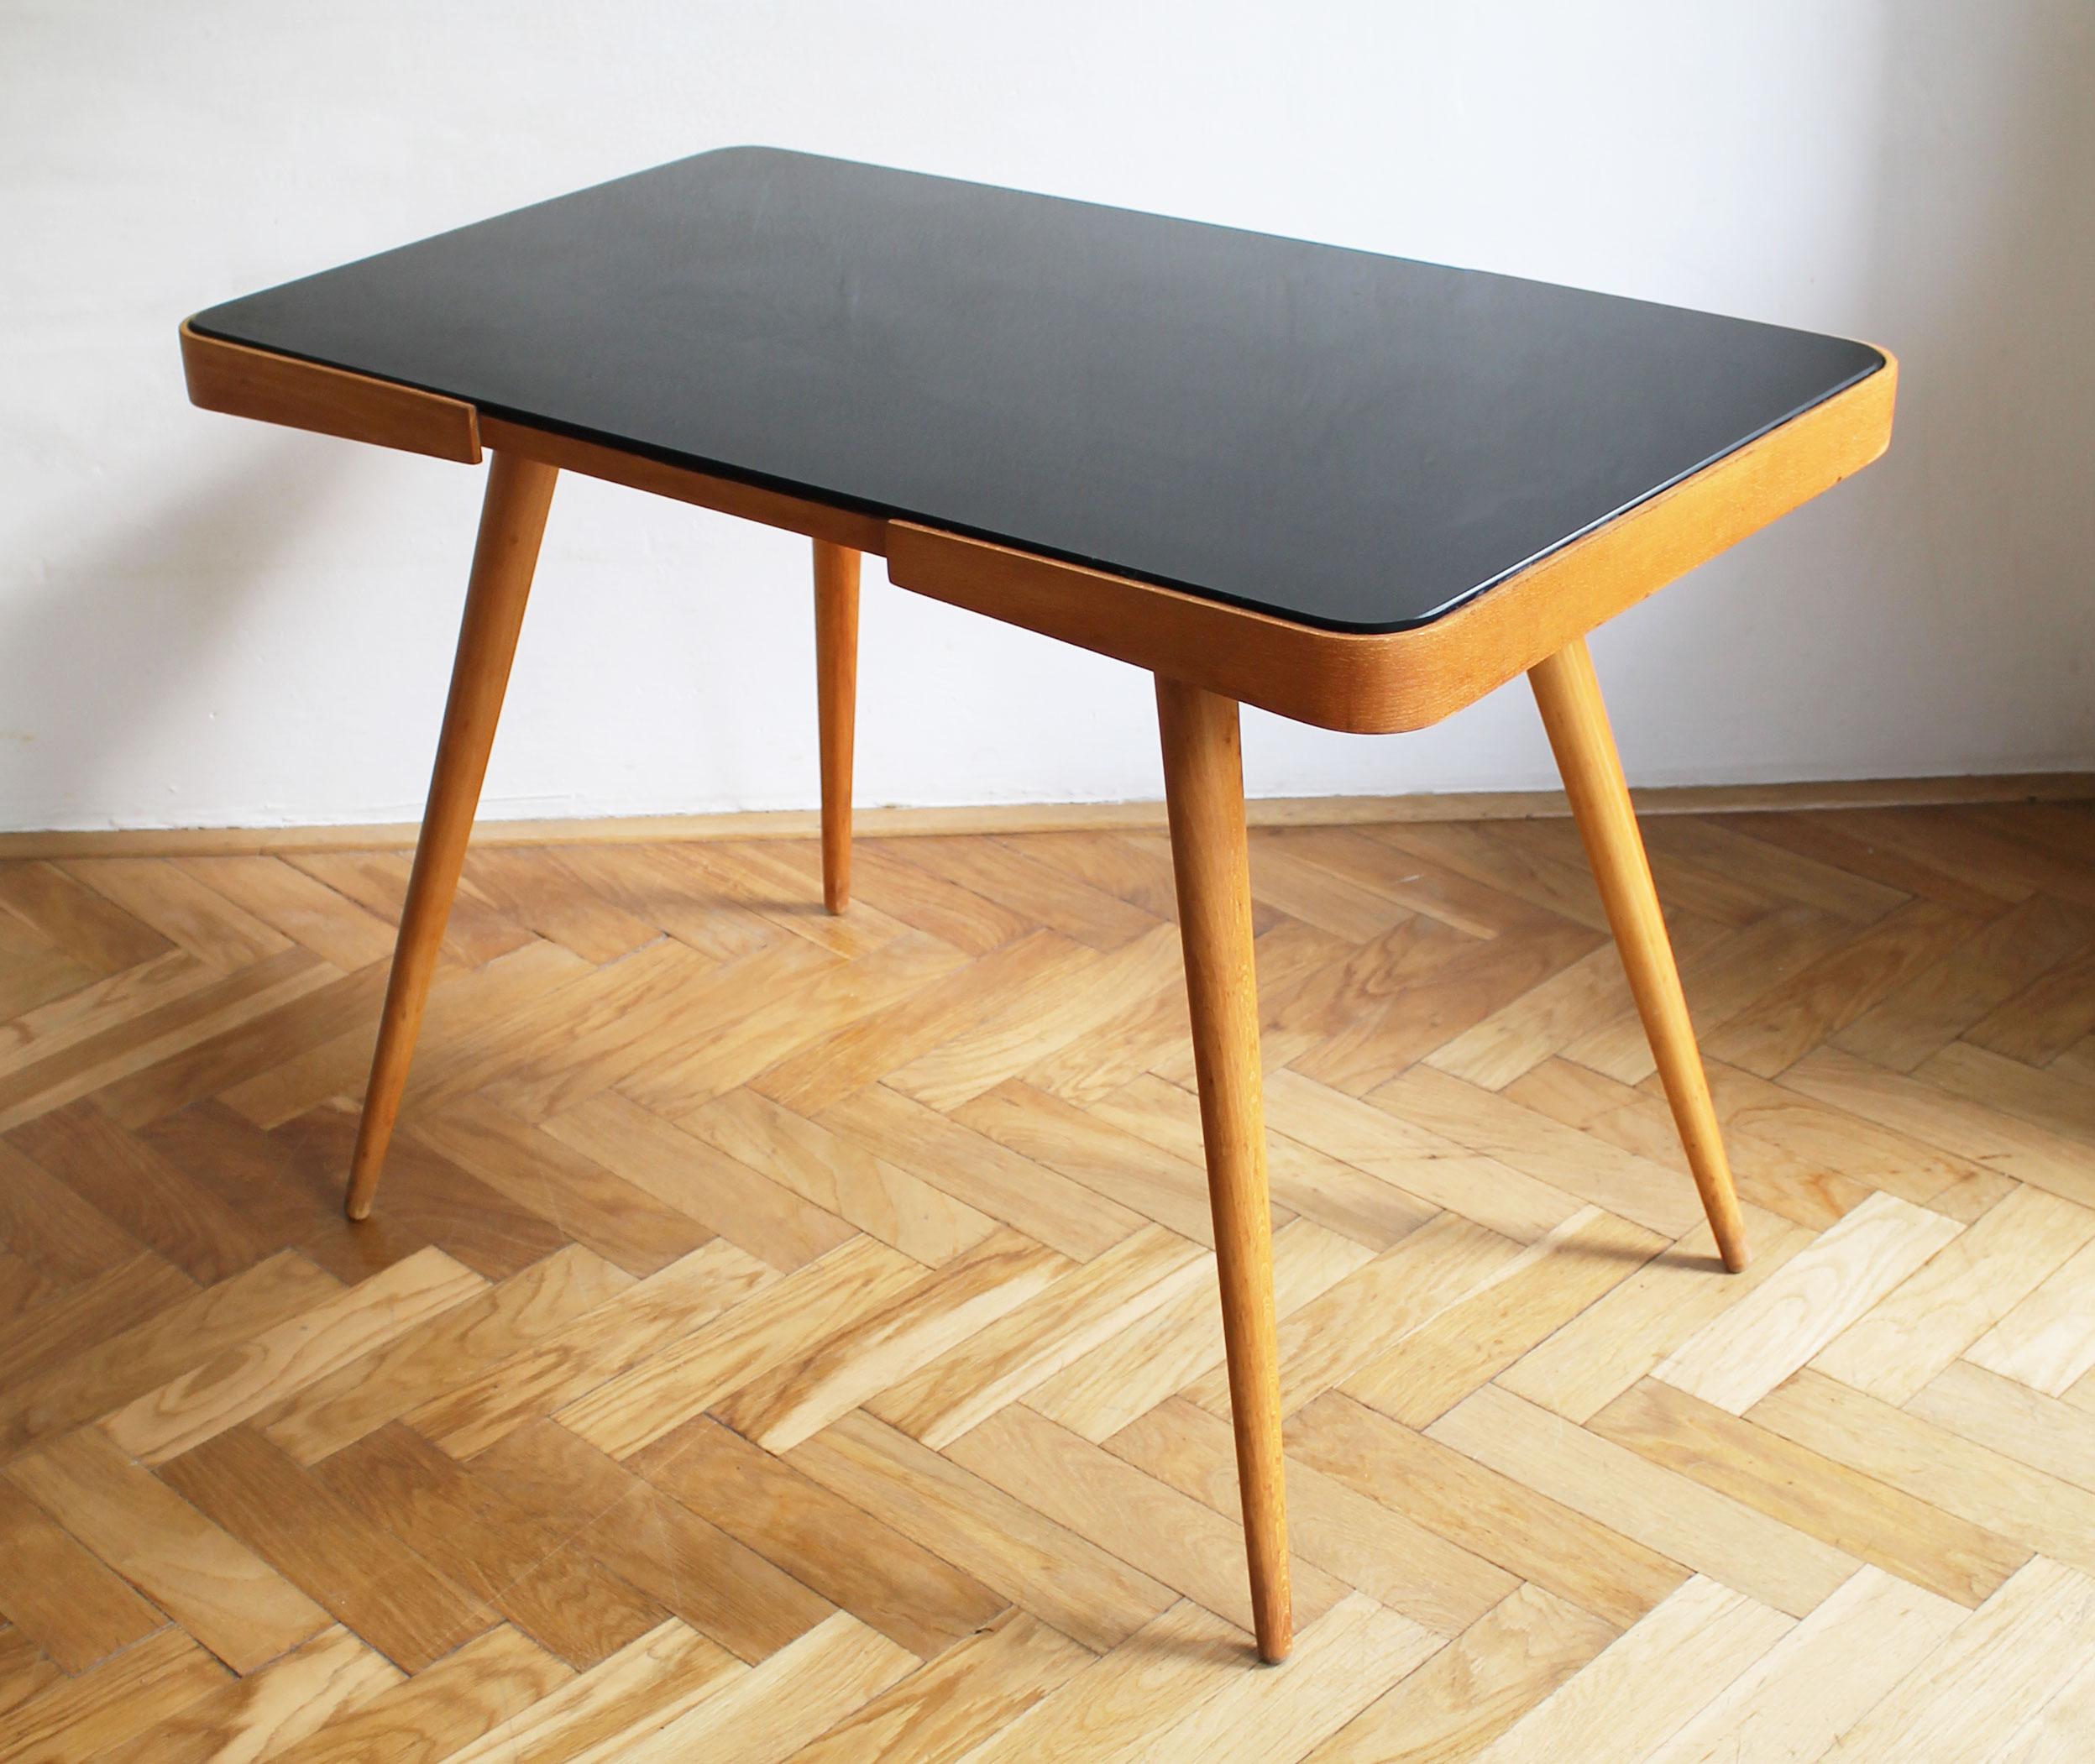 Czech 1960's Mid Century Coffee Table With a Black Opaxite Glass - Smaller version For Sale